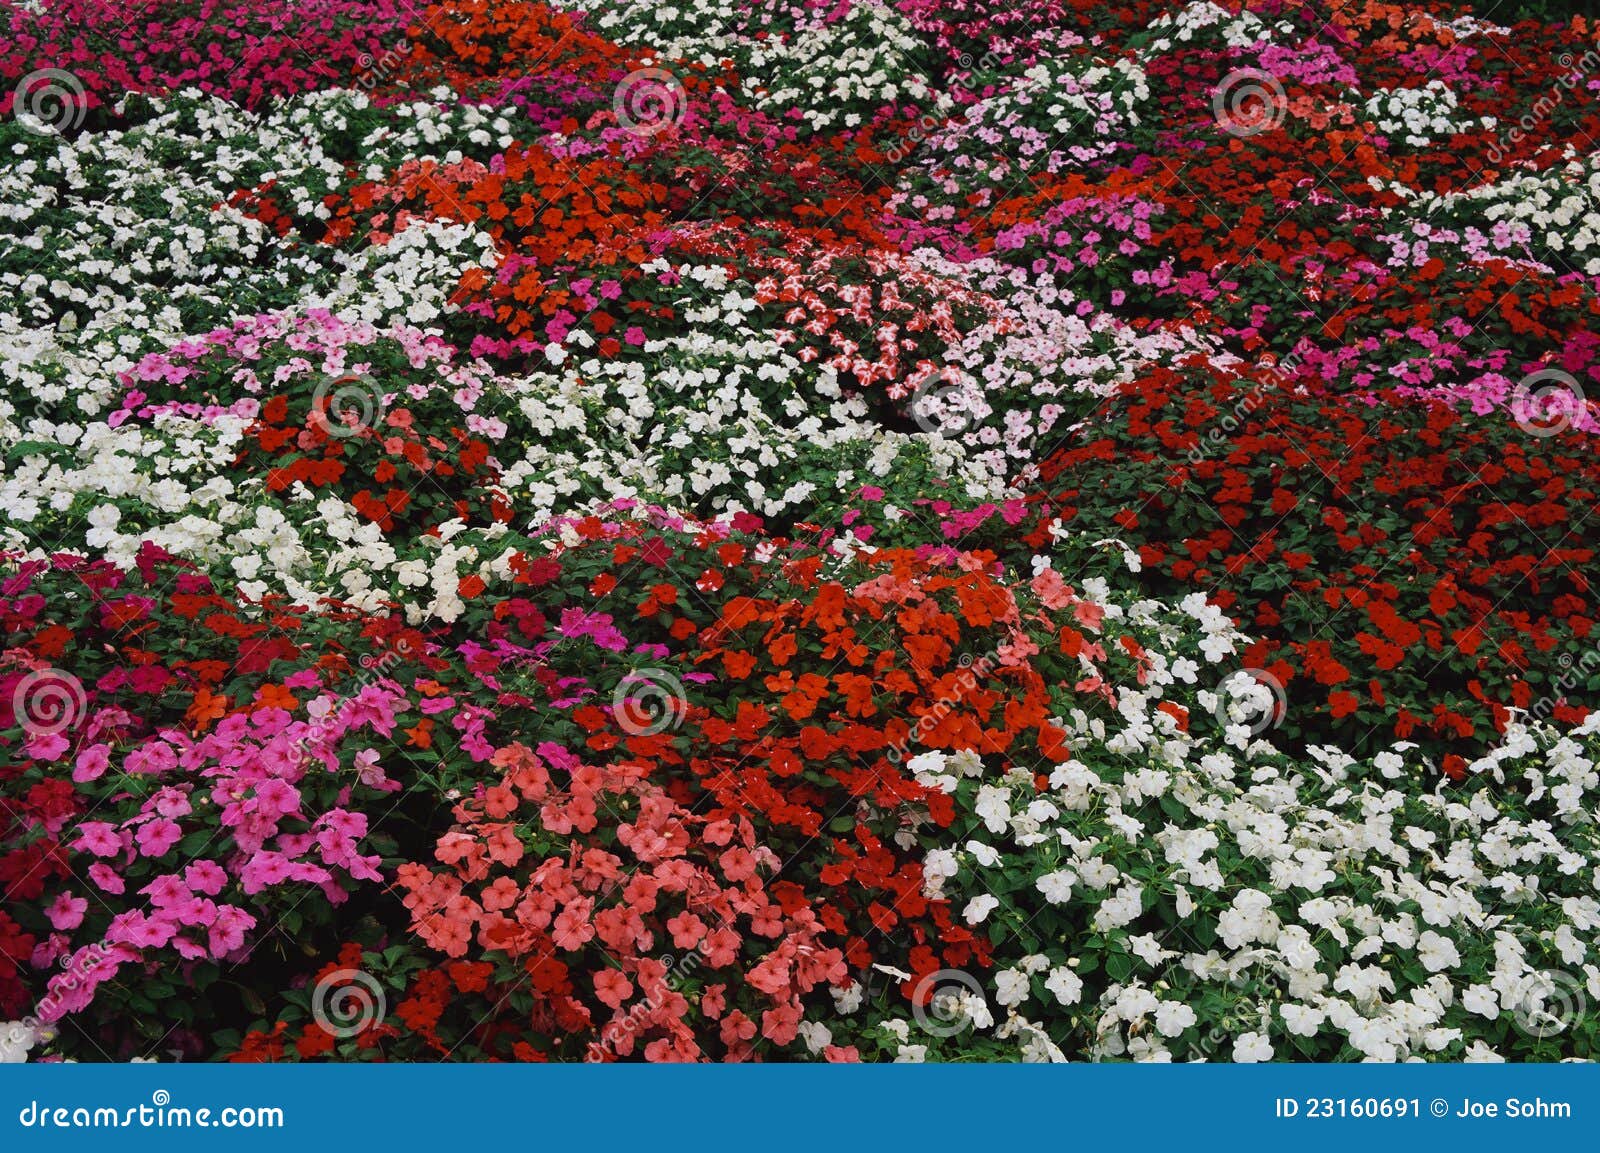 This is a flower bed of Impatiens. The flowers range in color from ...